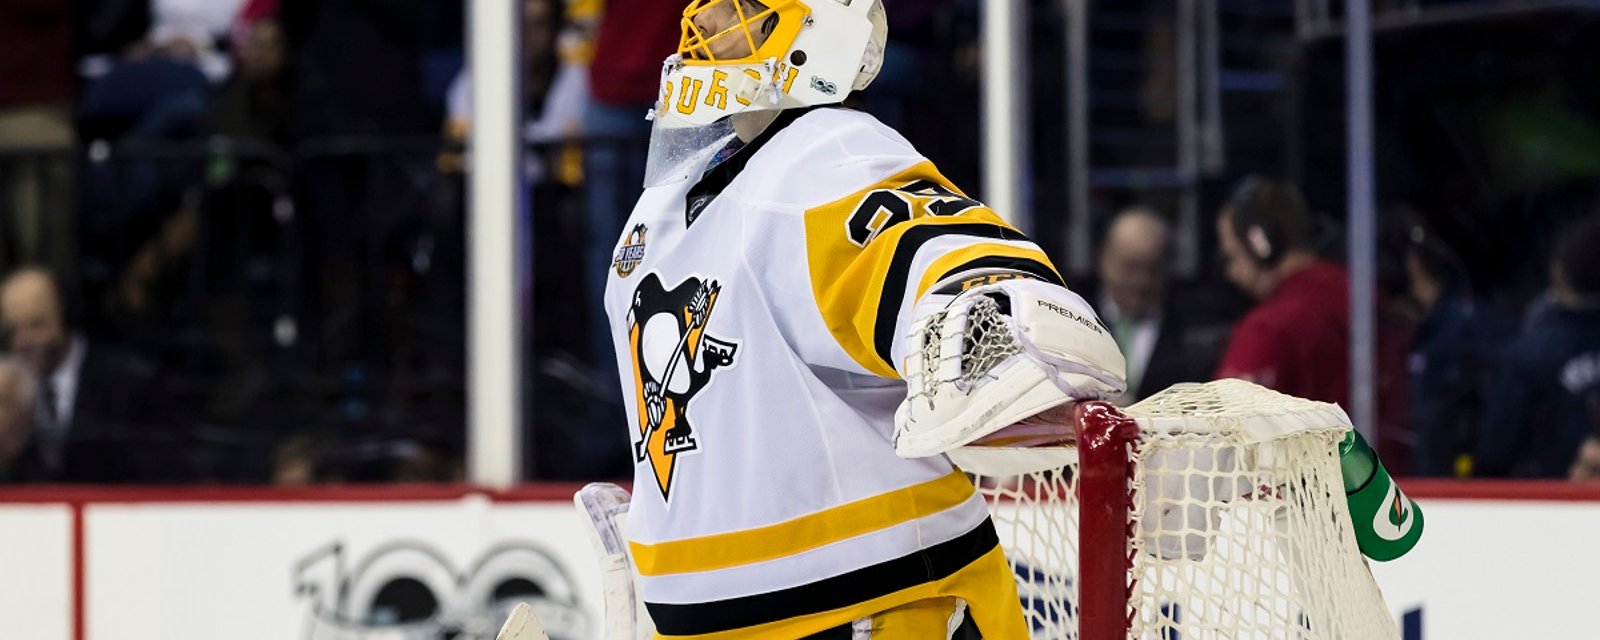 Surprising team emerges as the favorite to acquire Fleury this summer.